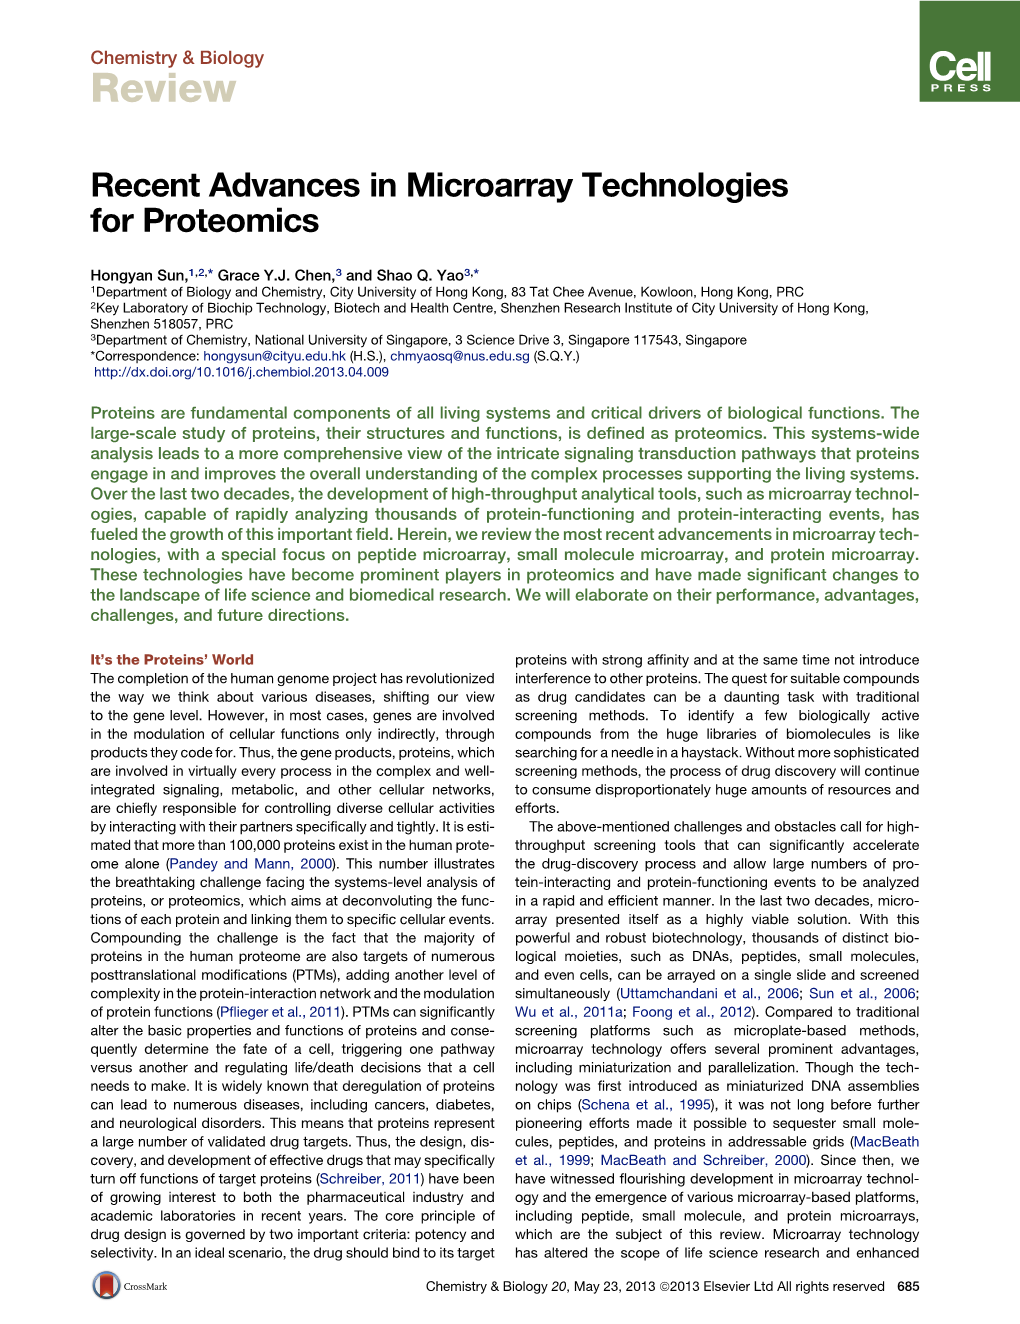 Recent Advances in Microarray Technologies for Proteomics